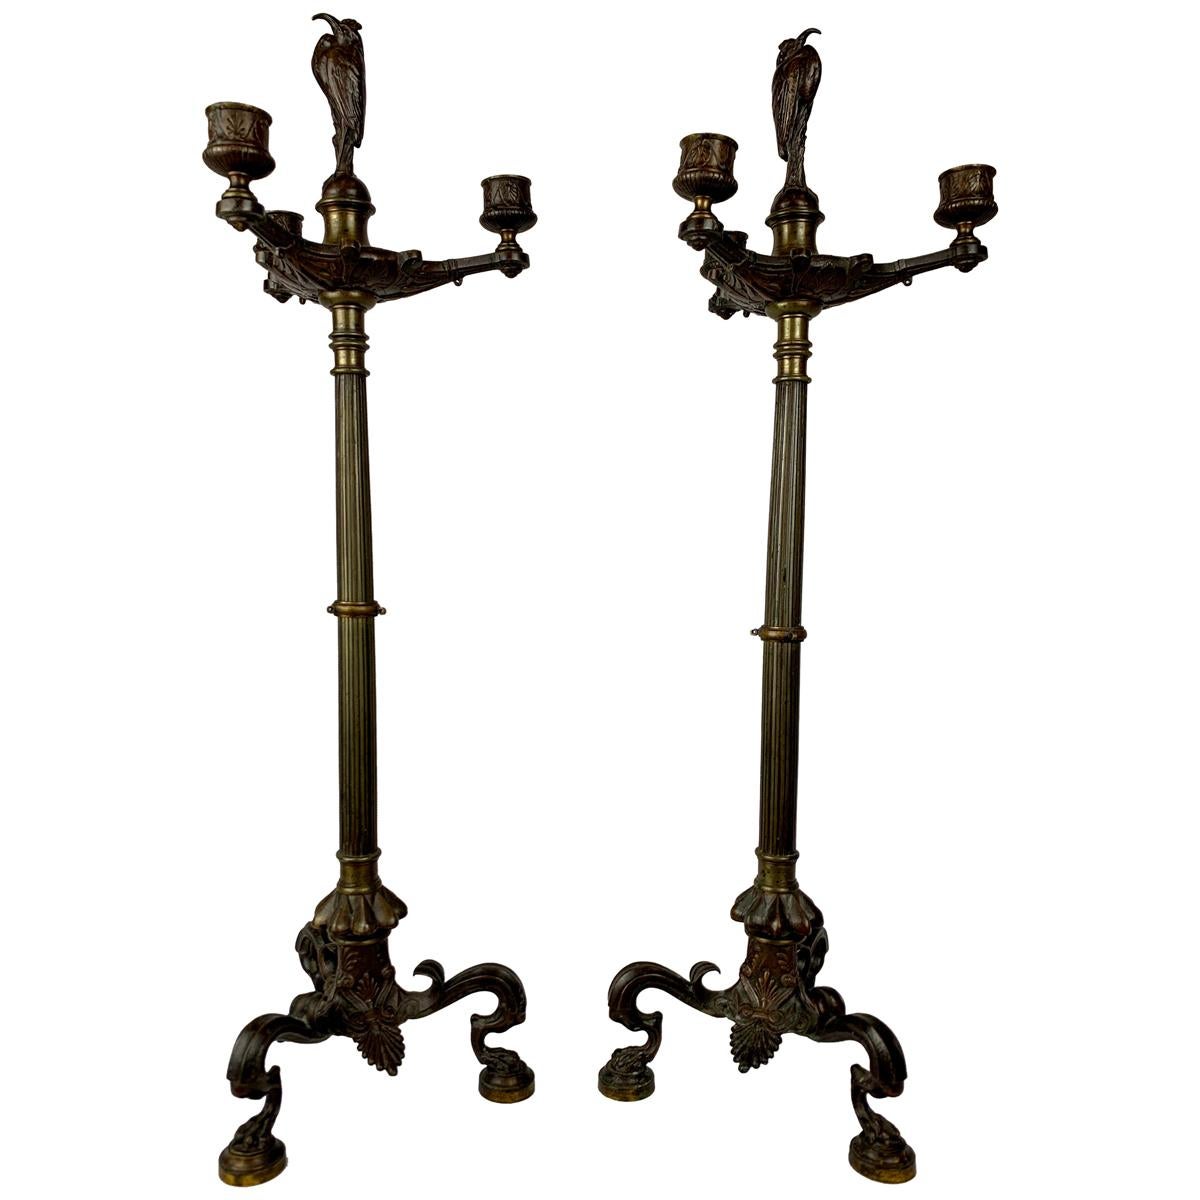 French Empire Patinated Bronze Tripod Candelabras, Lion's Paw Feet, 19th c.